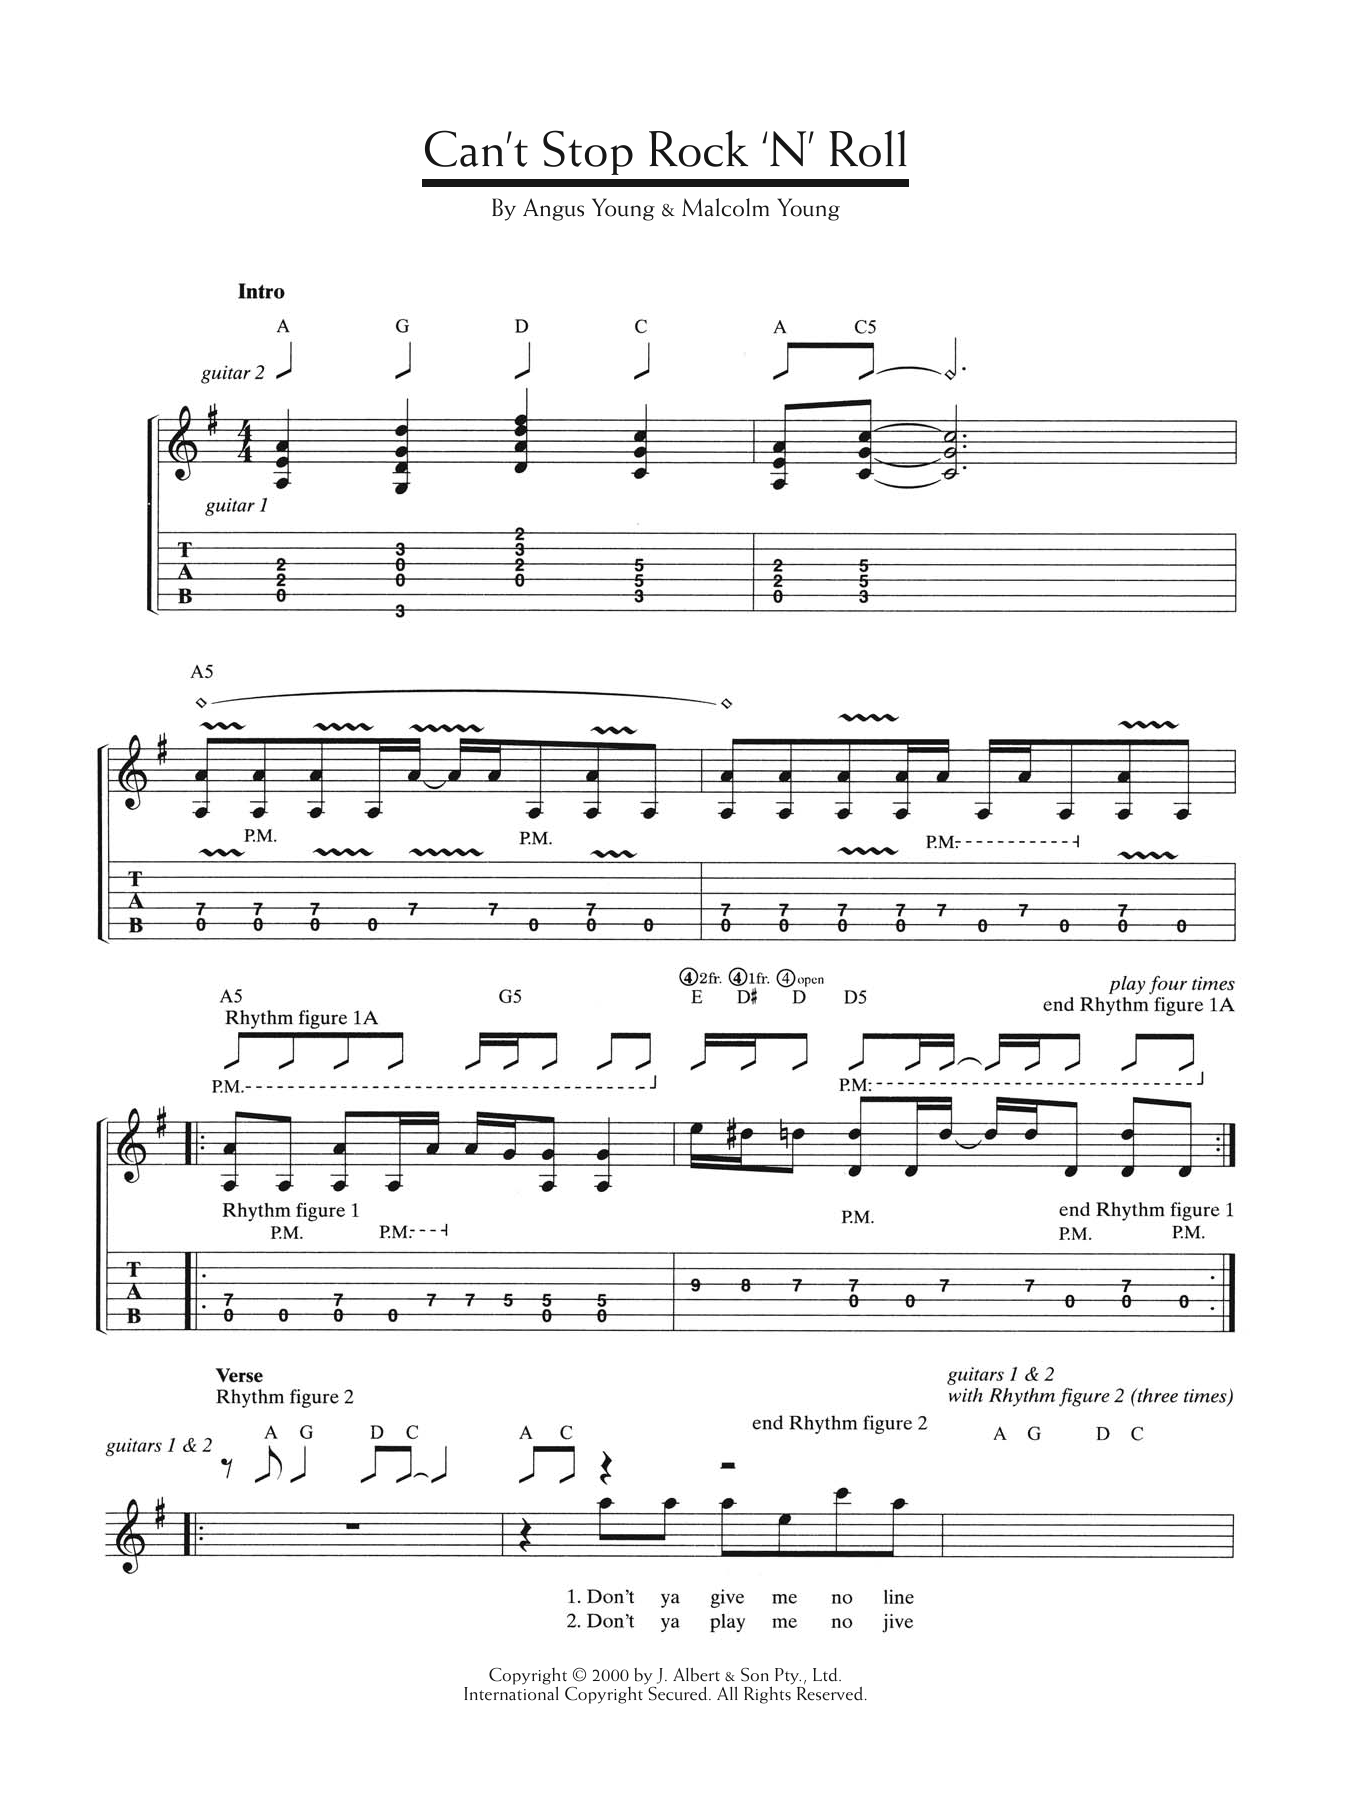 Download AC/DC Can't Stop Rock 'N' Roll Sheet Music